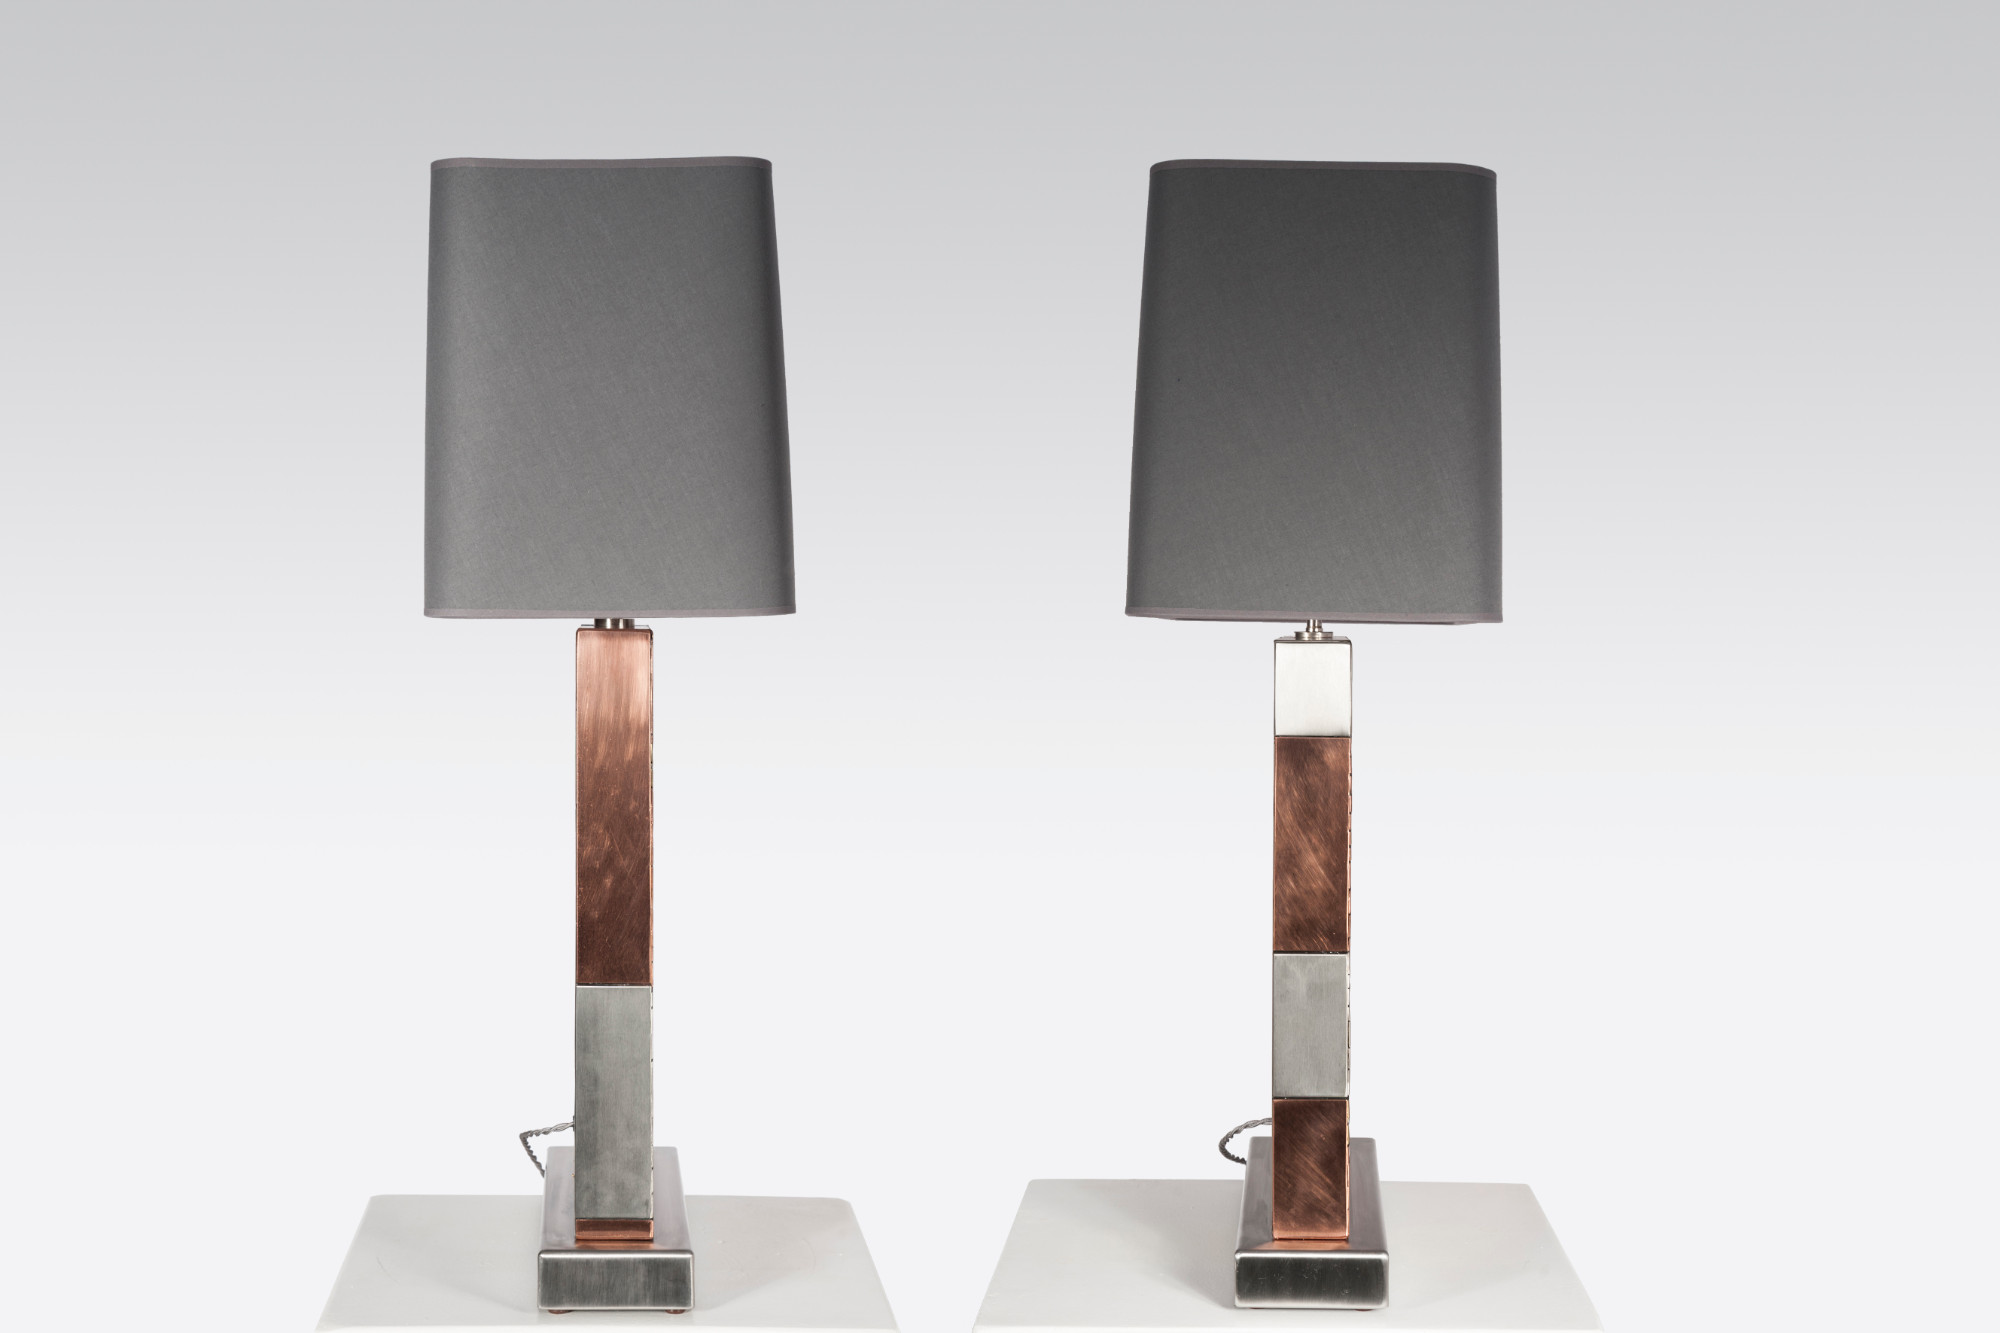 Pair of Table Lamps 